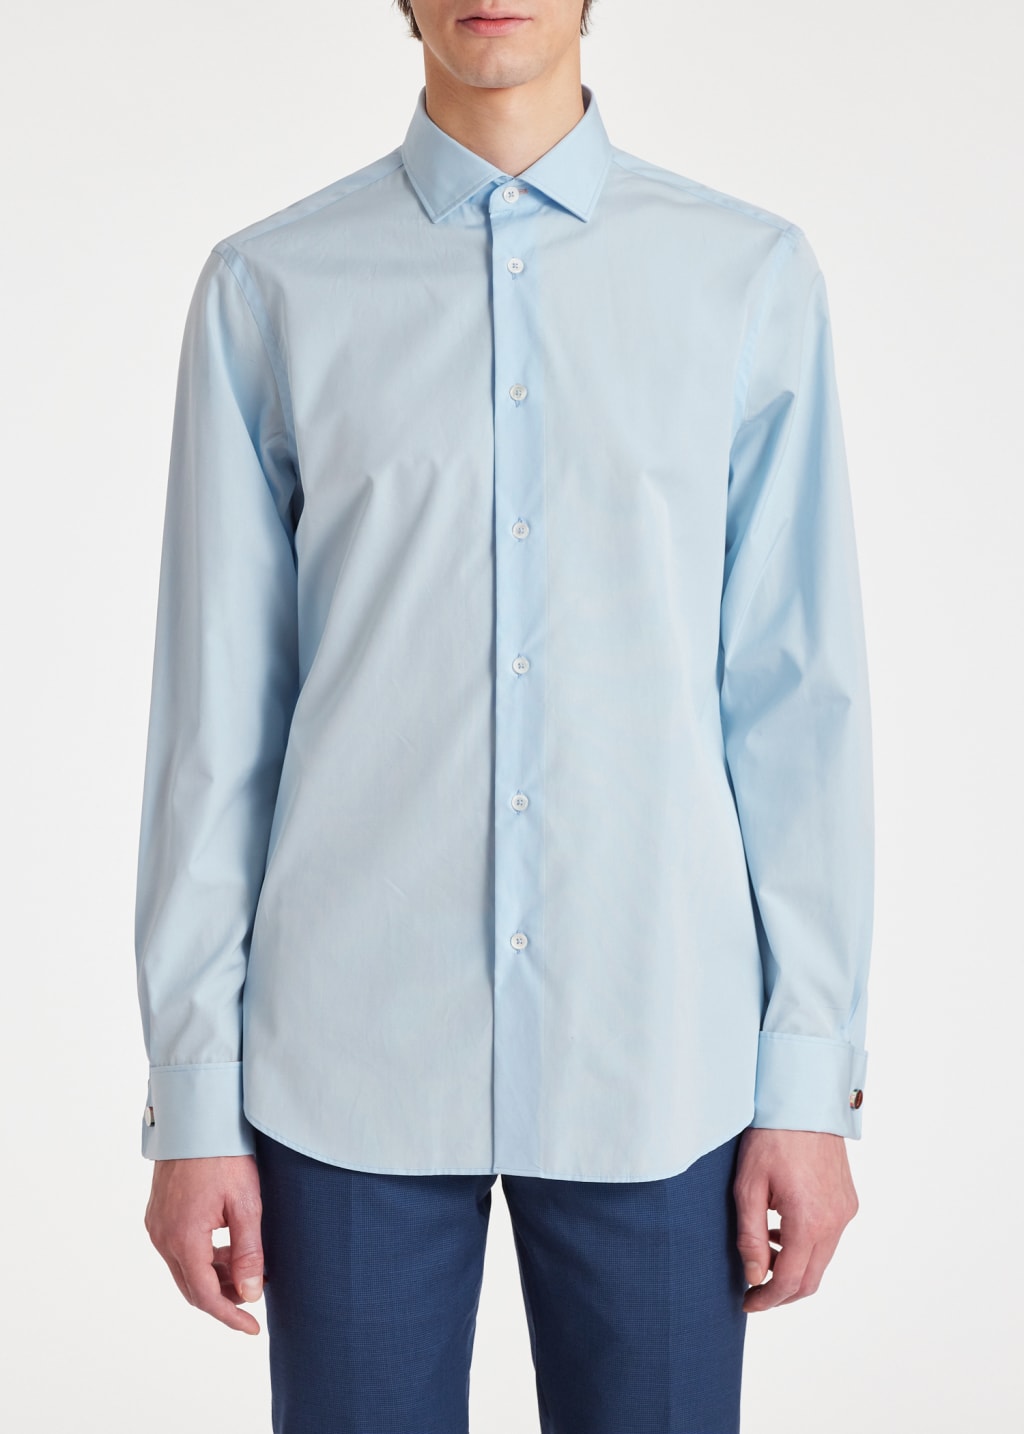 Model View - Tailored-Fit Sky Blue Shirt With 'Signature Stripe' Double Cuff Paul Smith